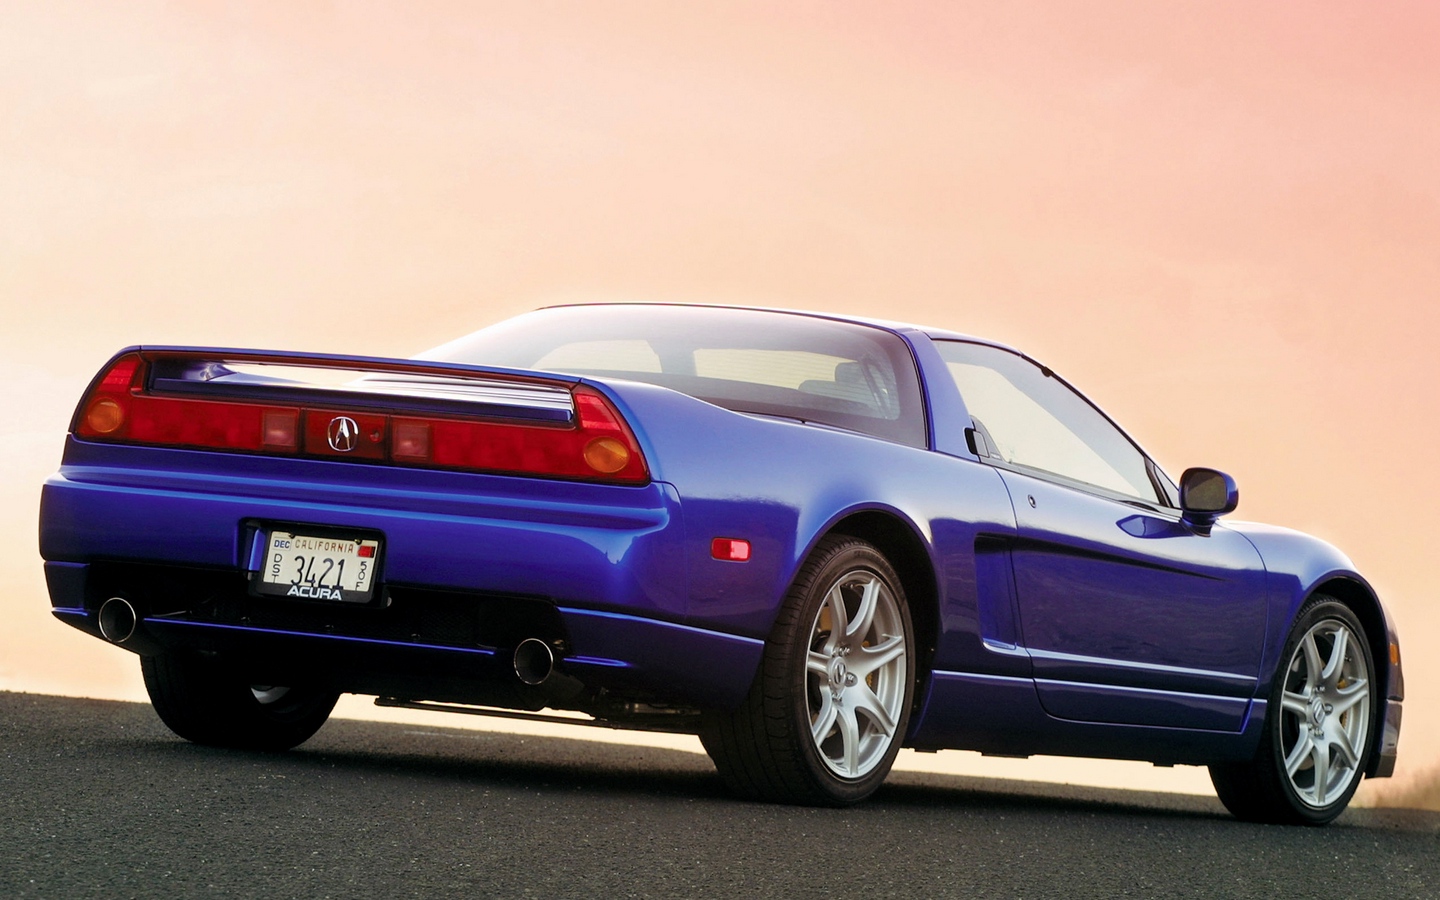 Acura NSX Mugen 2003 acura_nsx_blue_rear_view_style_sports_cars_sunset_13666_1440x900